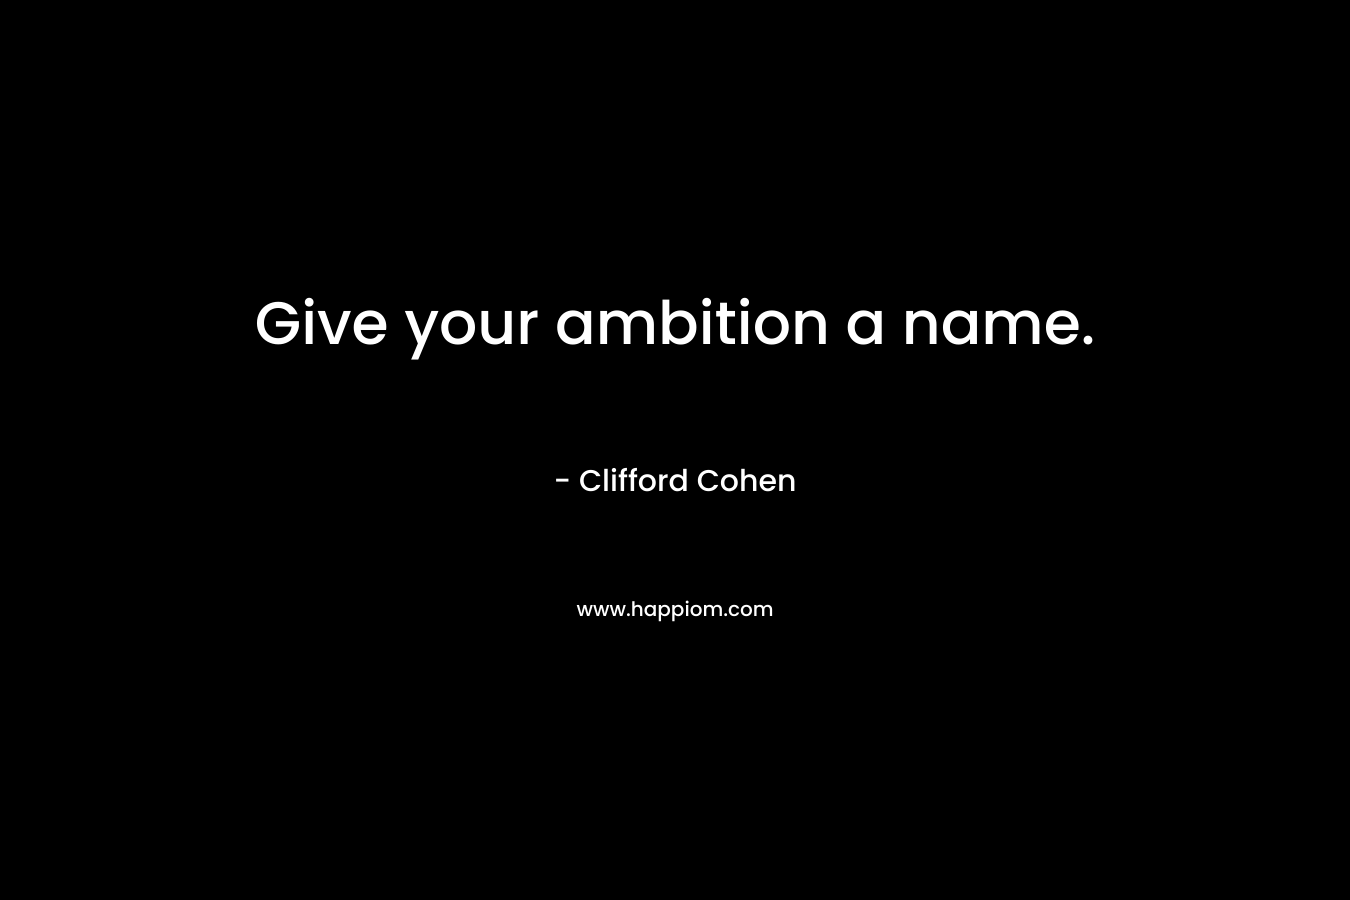 Give your ambition a name. – Clifford Cohen